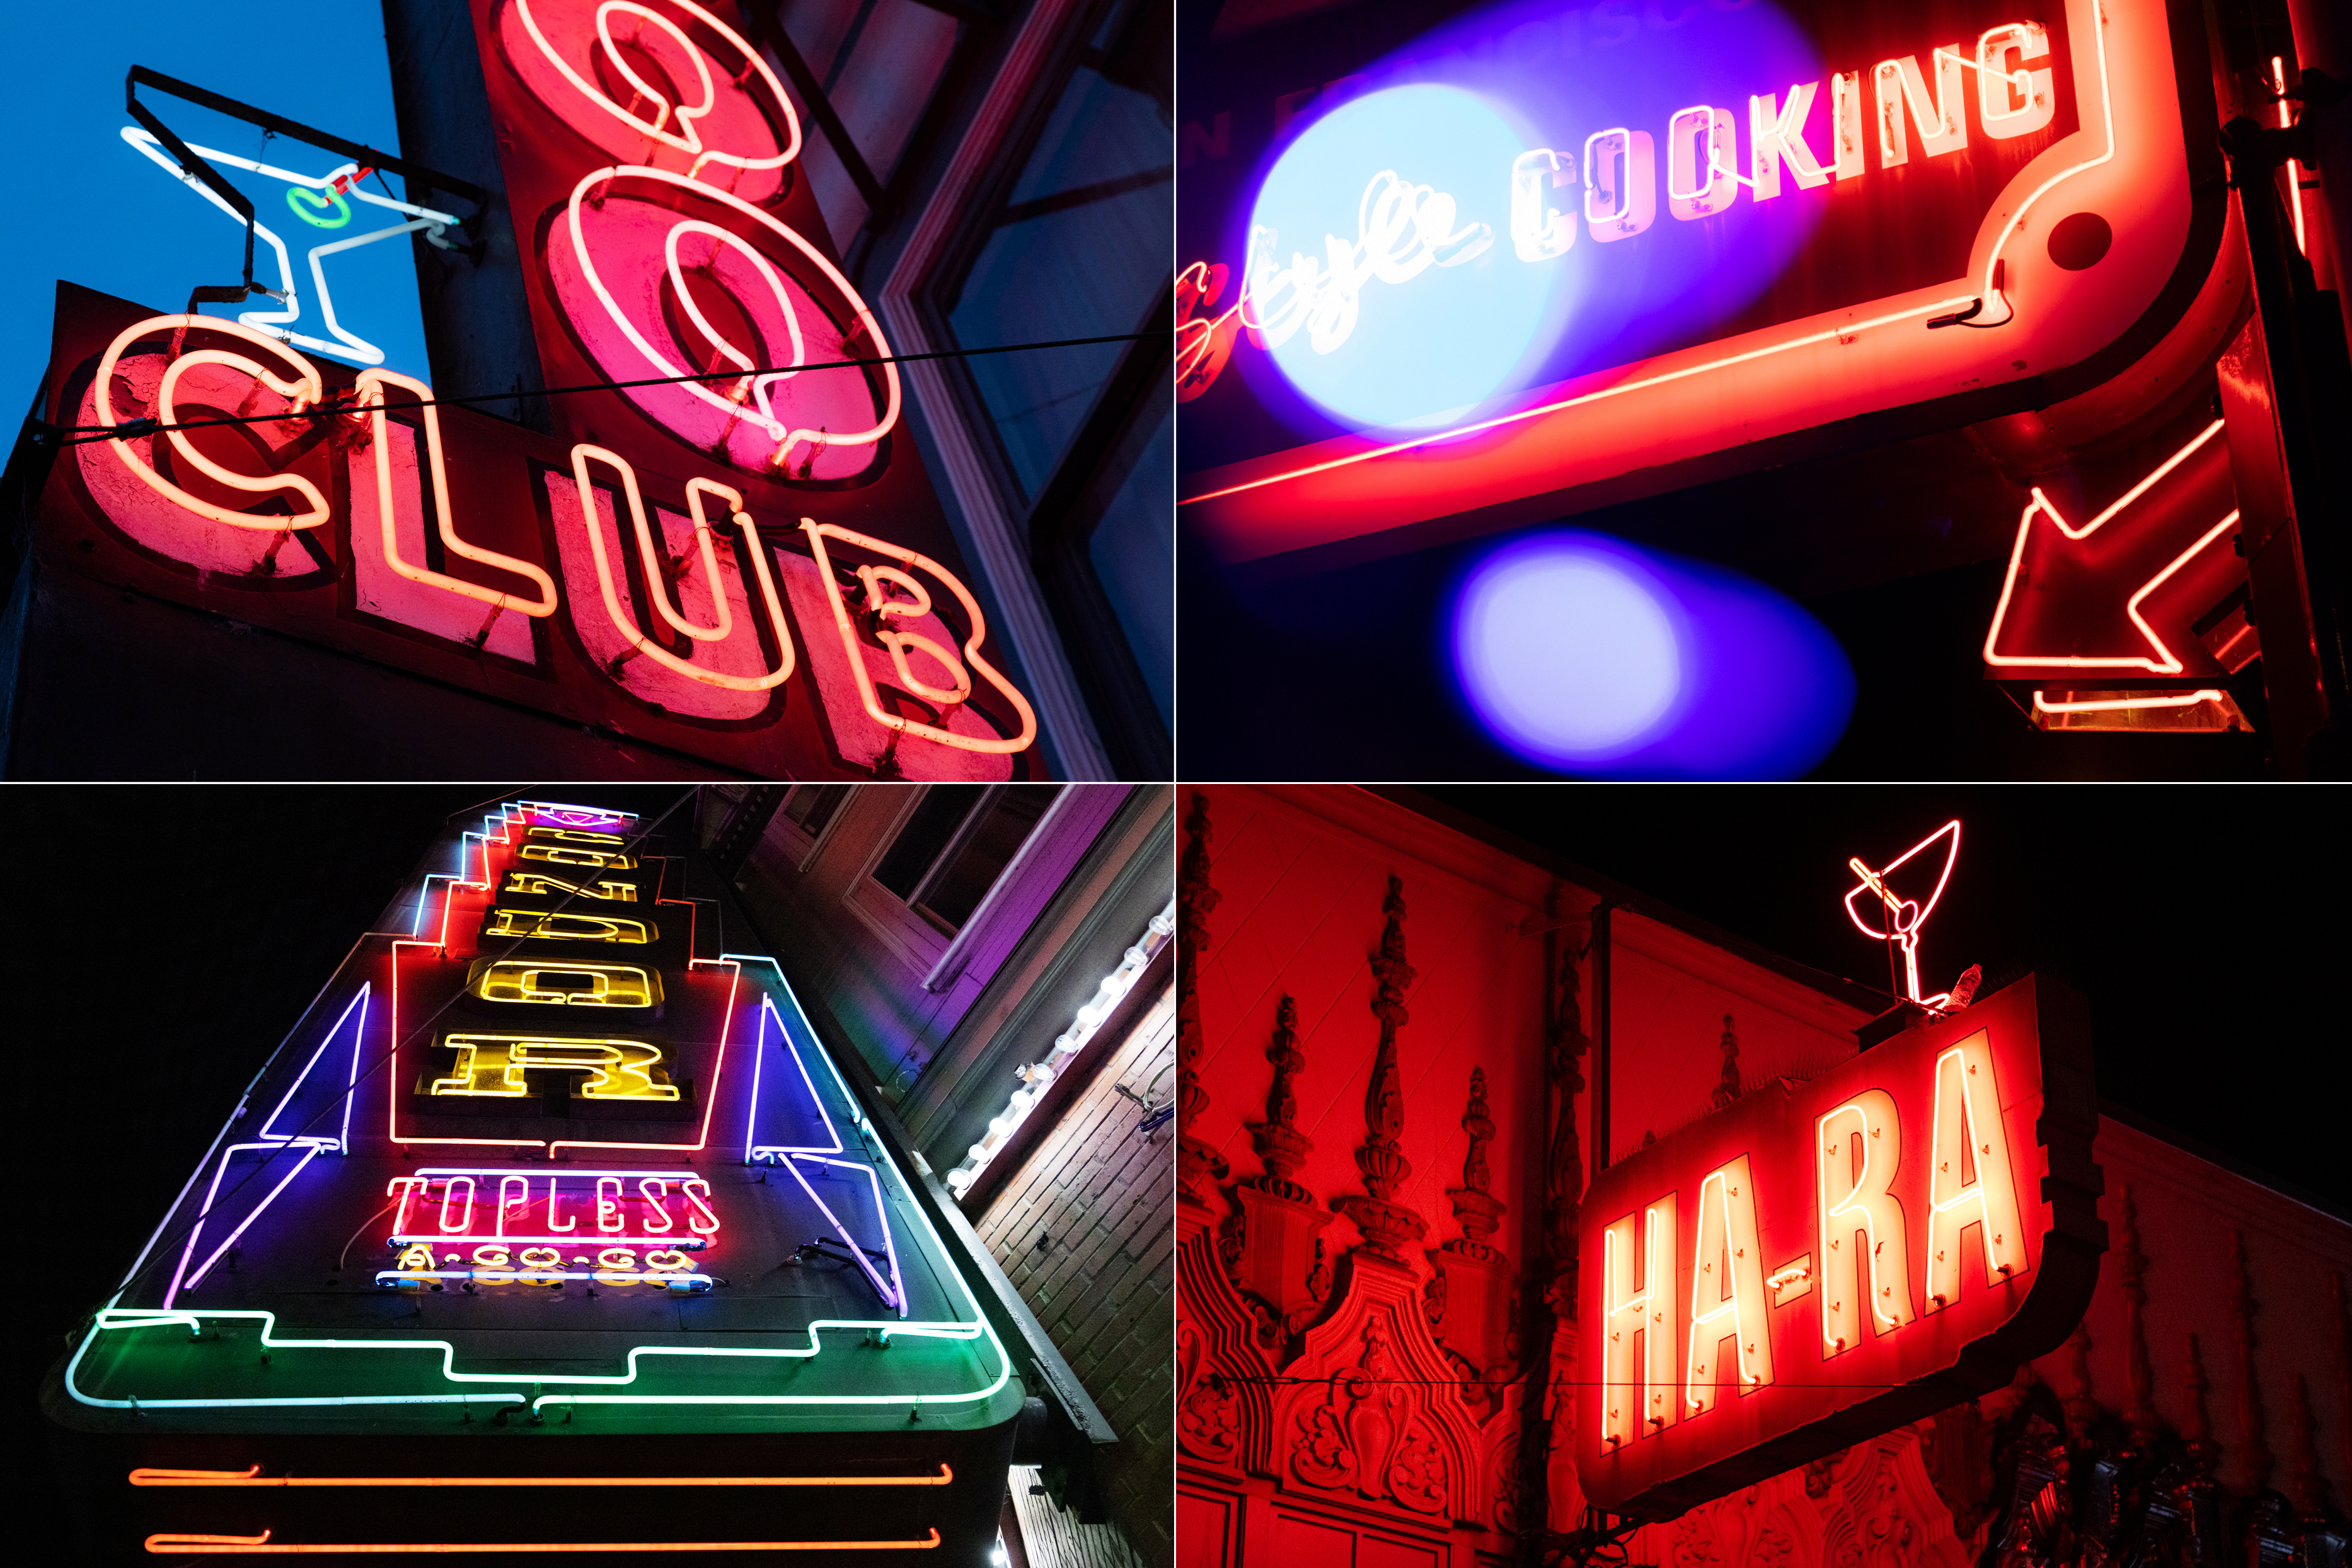 A grid of 4 pictures of neon signage of a neon sign that reads Club with a detail of a cocktail, an arrow with thre words "COOKING", the words "HA-RA" with a cocktail above it and the works "TOPLESS A GO GO" and "CONDOR" on a tall neon sign.